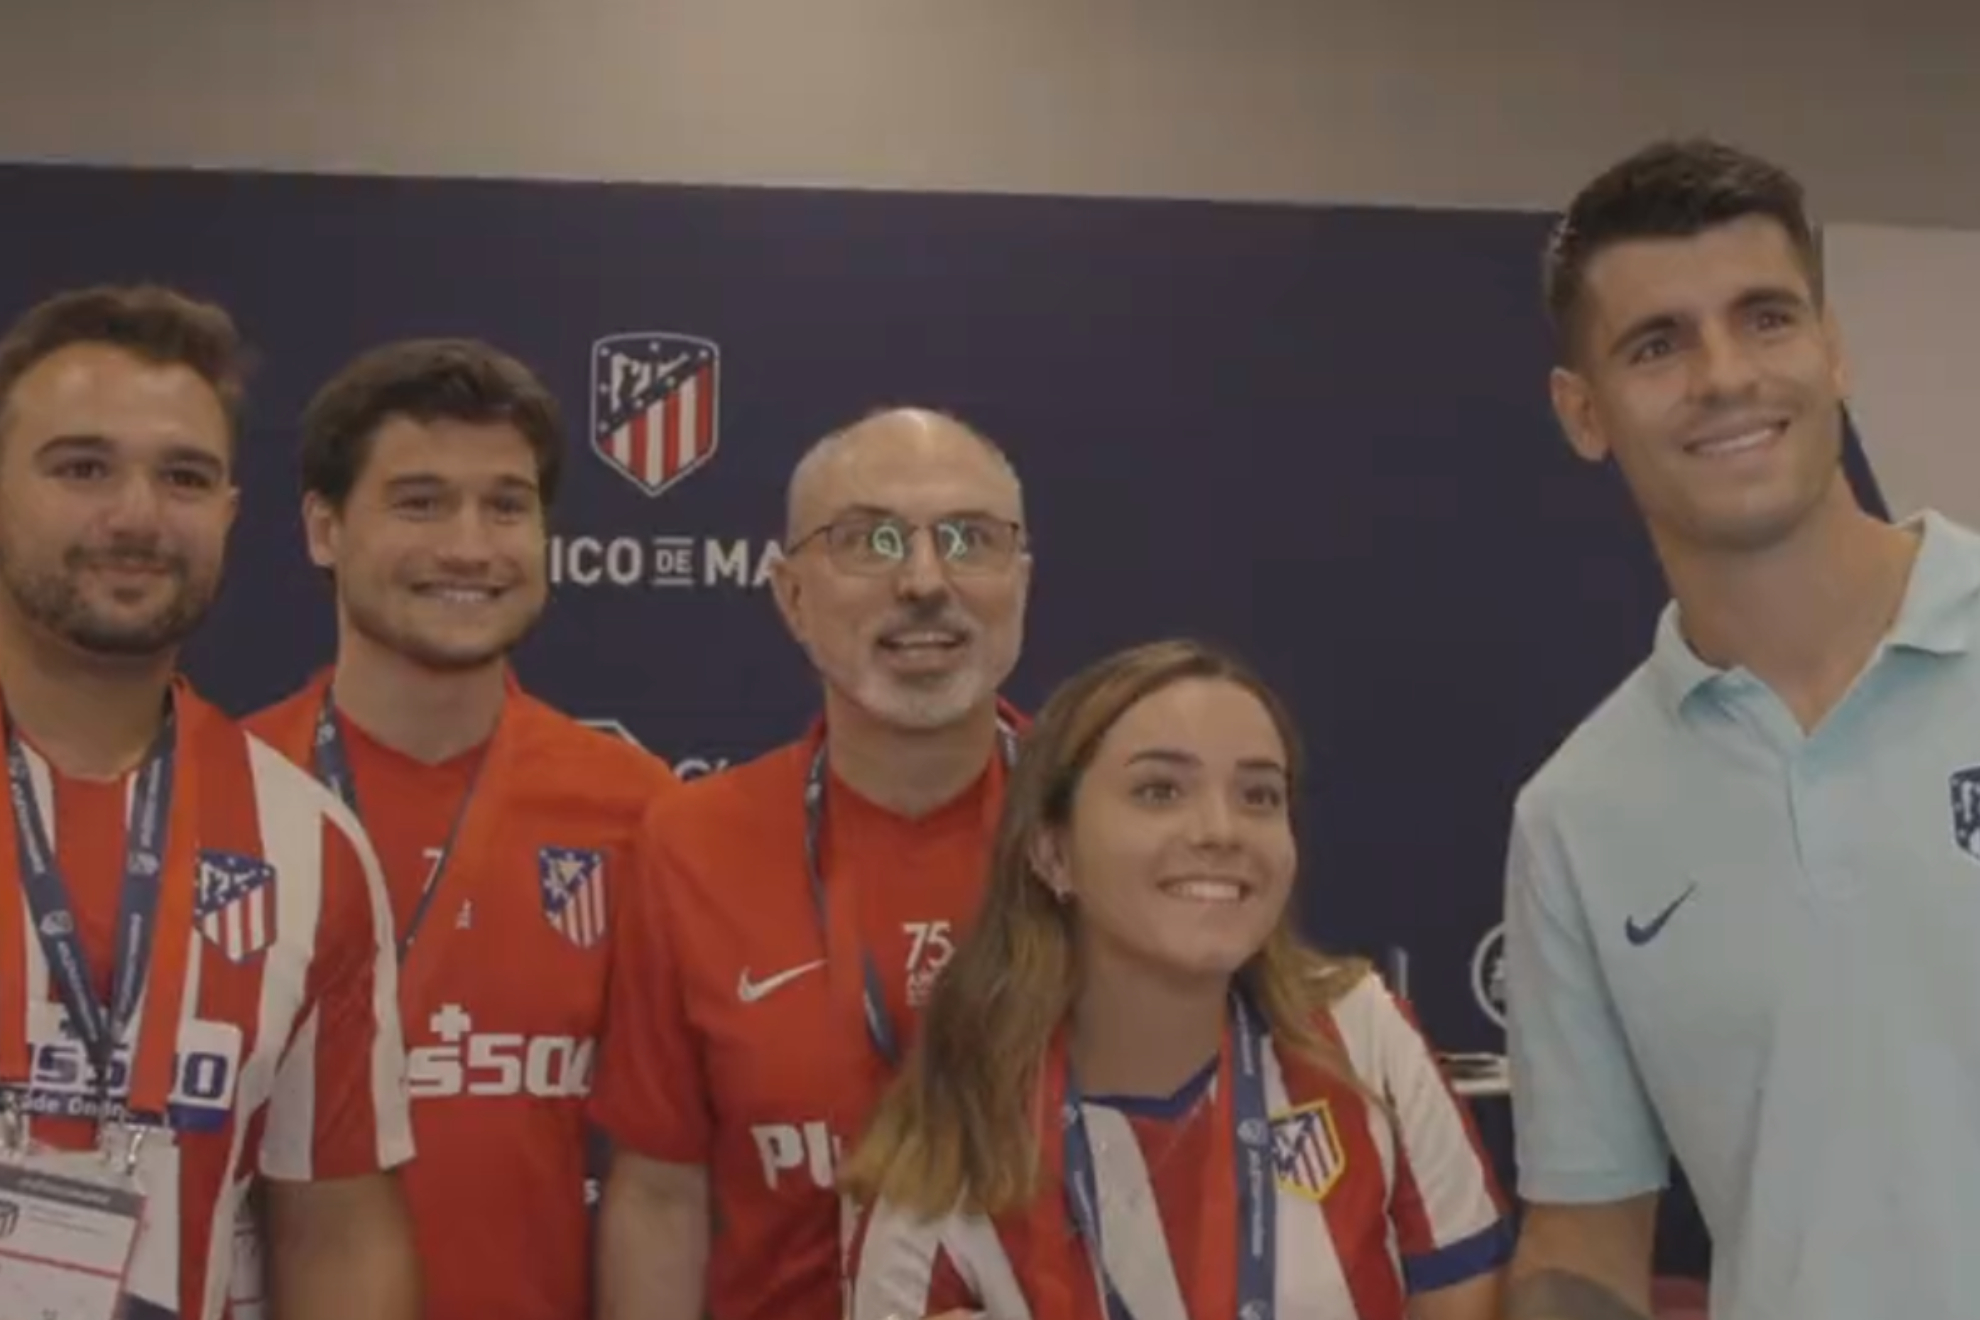 This was the Meet&Greet Atletico Madrid held with the club's fans